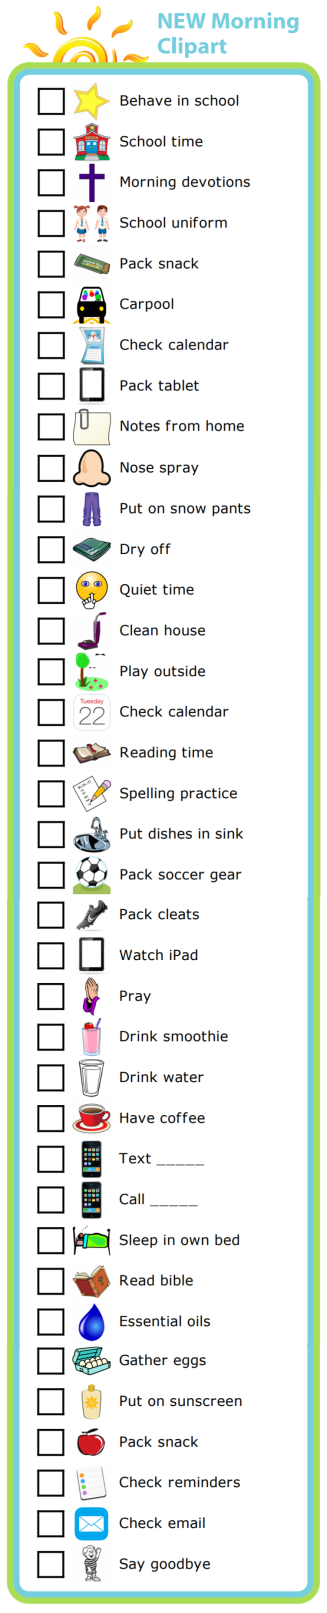 37 new images for the morning routine activity, including the much requested "sleep in your own bed"! Use them to create your own, custom morning routine checklist.